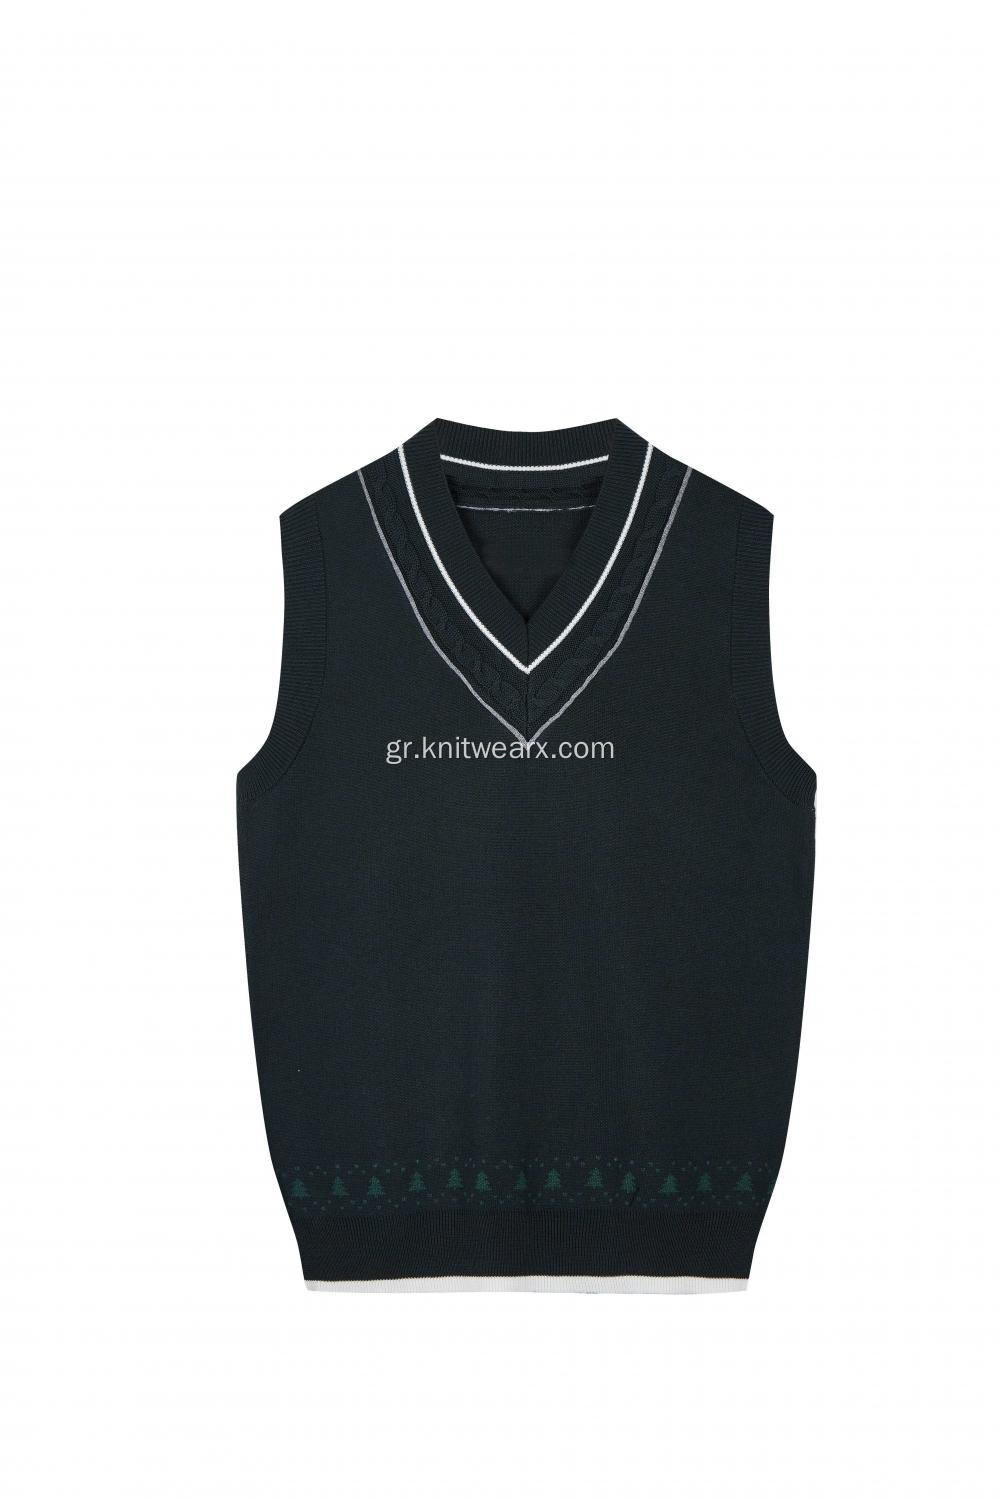 Boy's Knitted Cable Neck Jacquard School Vest